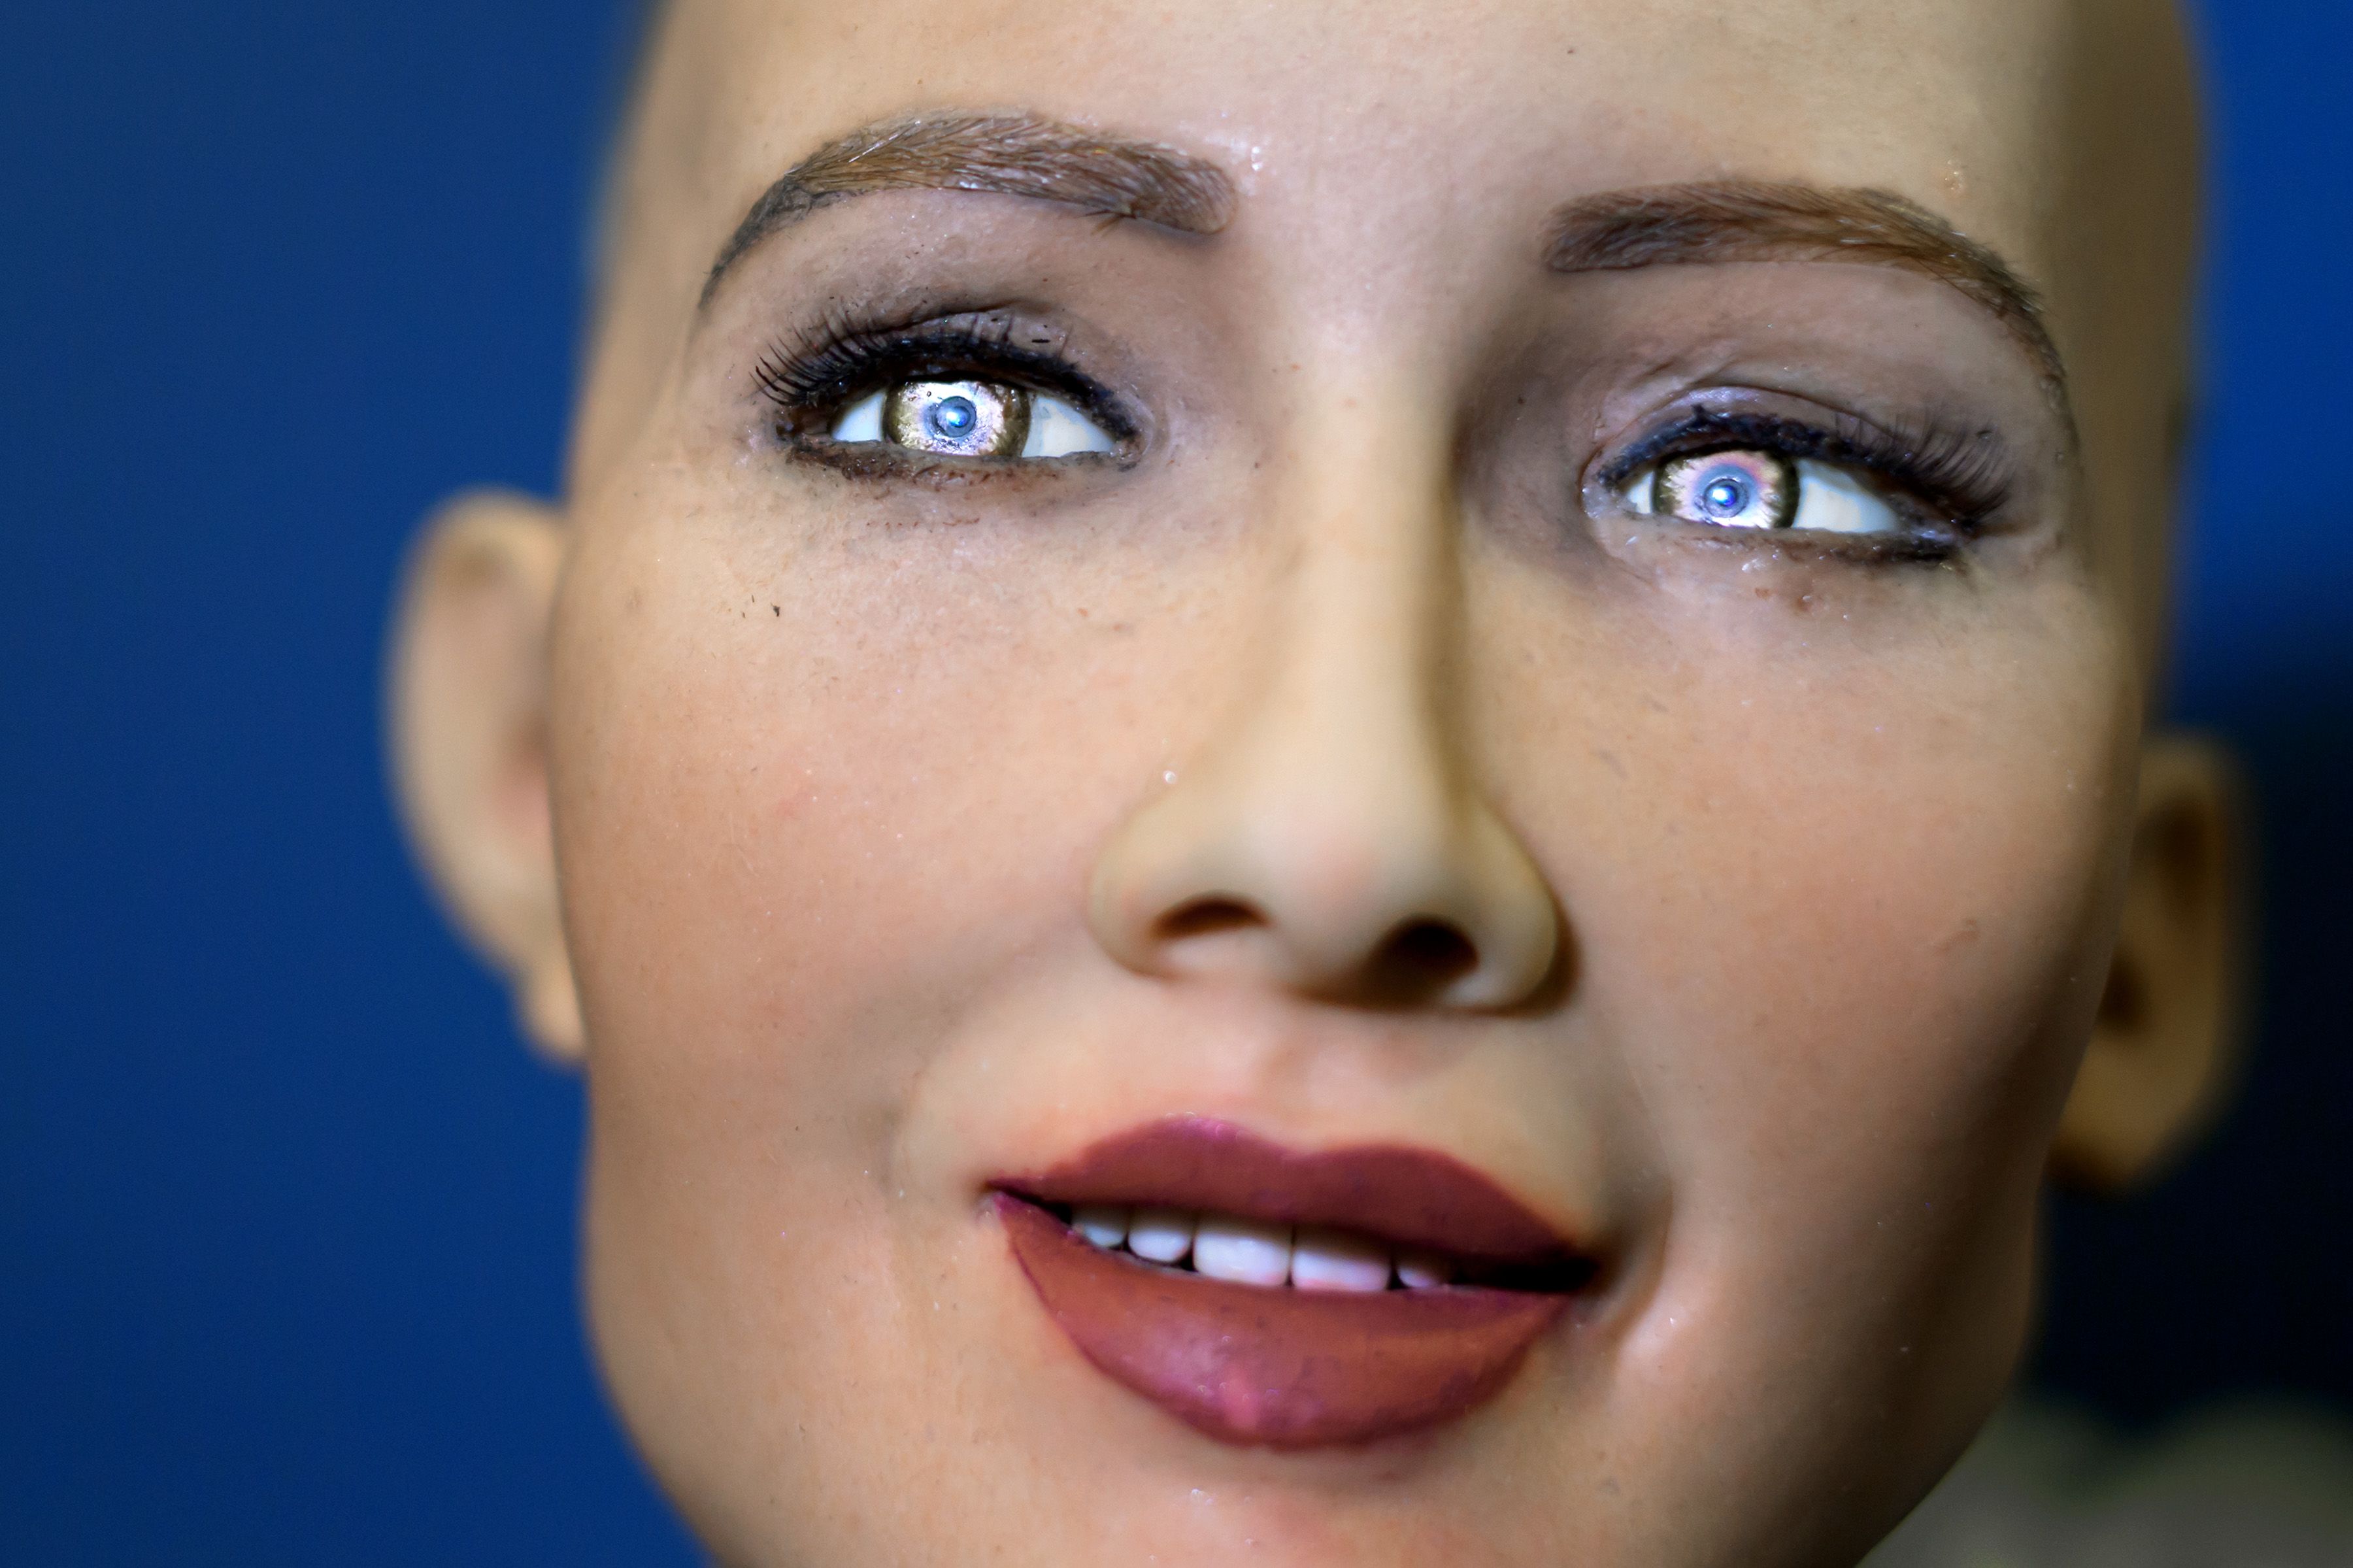 I helped build Sophia the Robot. We should not be scared of AI for